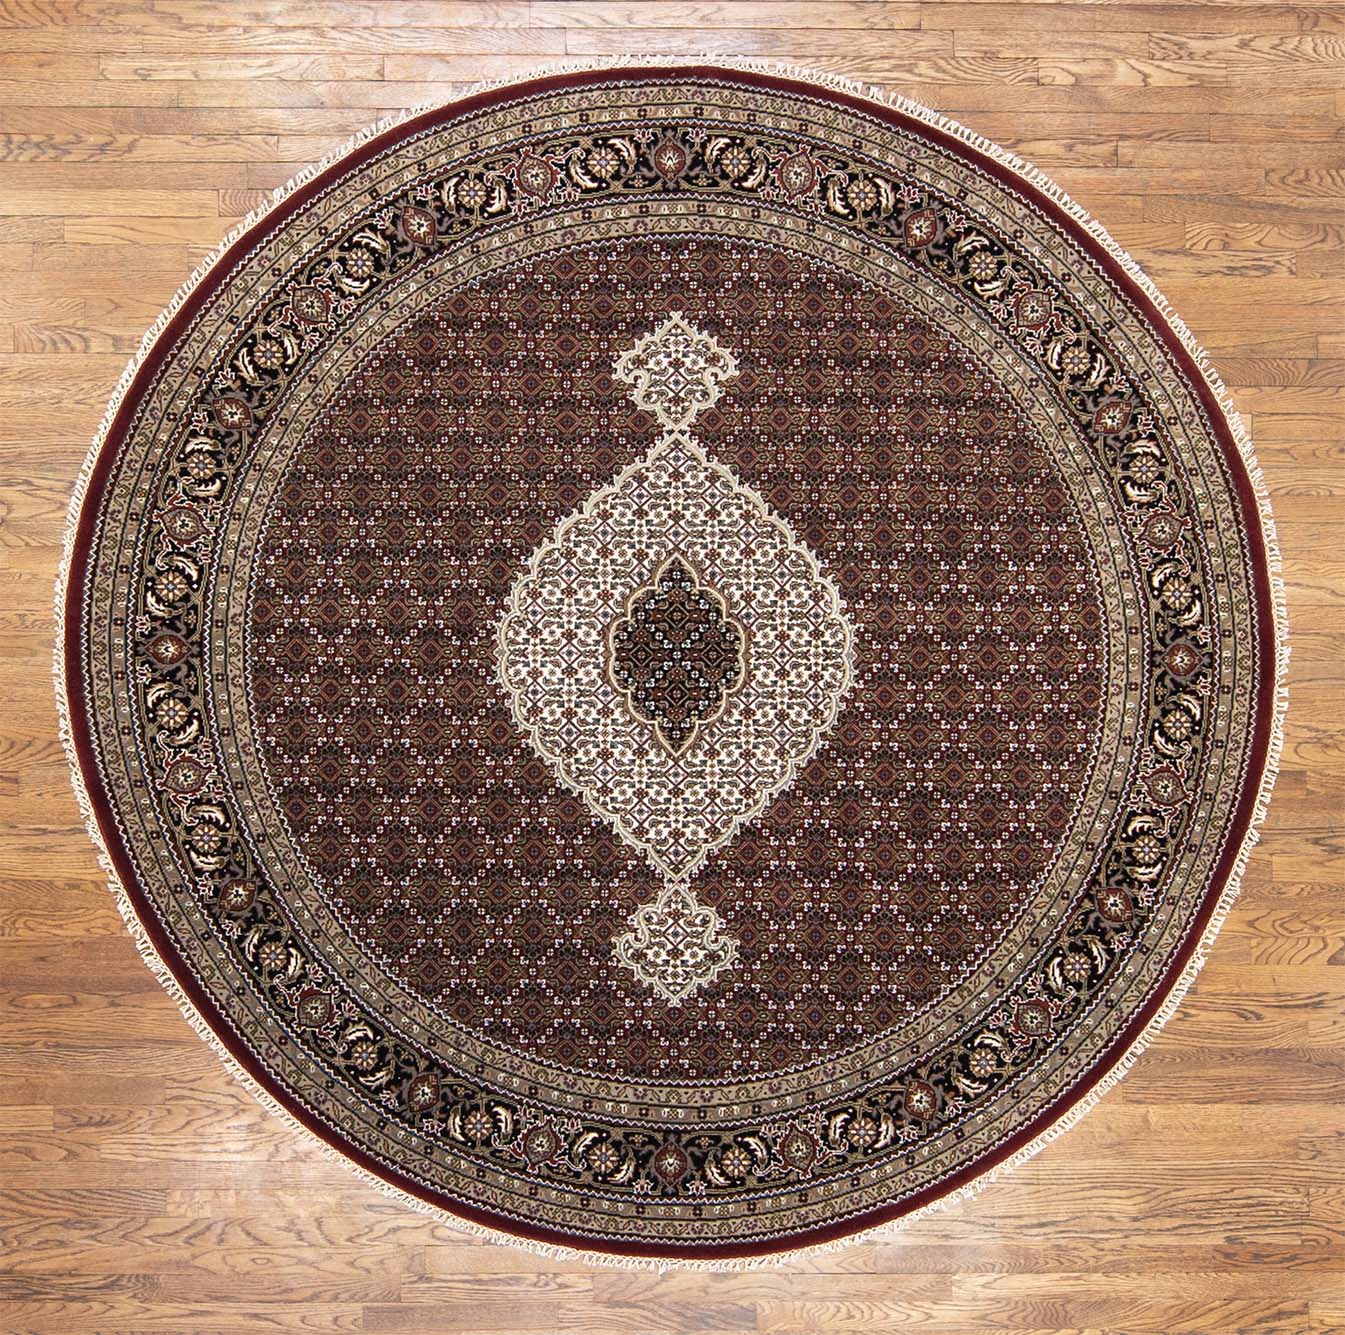 8x8 round area rug. Handmade wool round area rug in red color made in India.